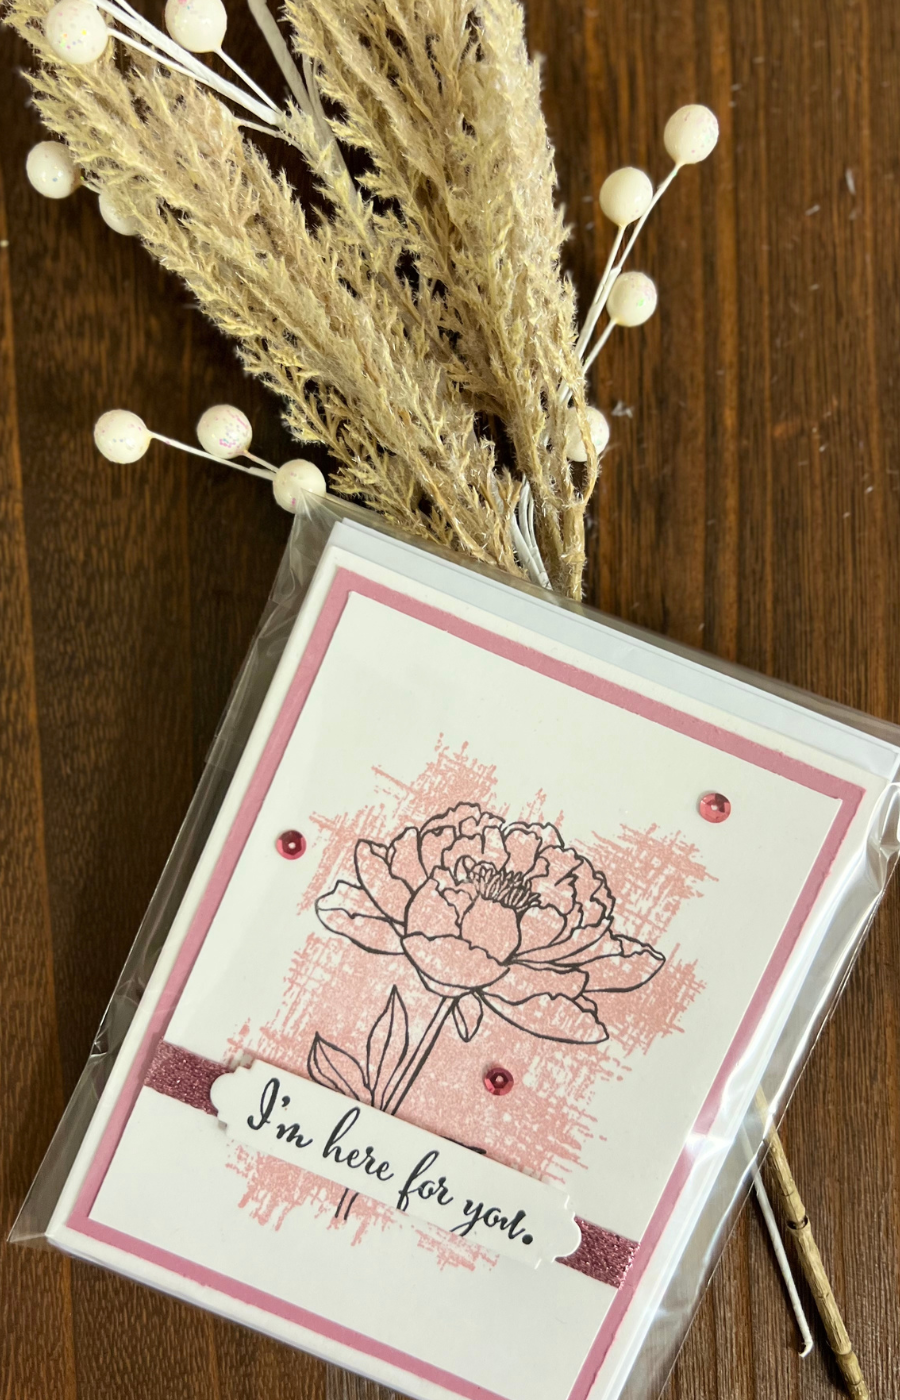 Handmade Here For You Cards